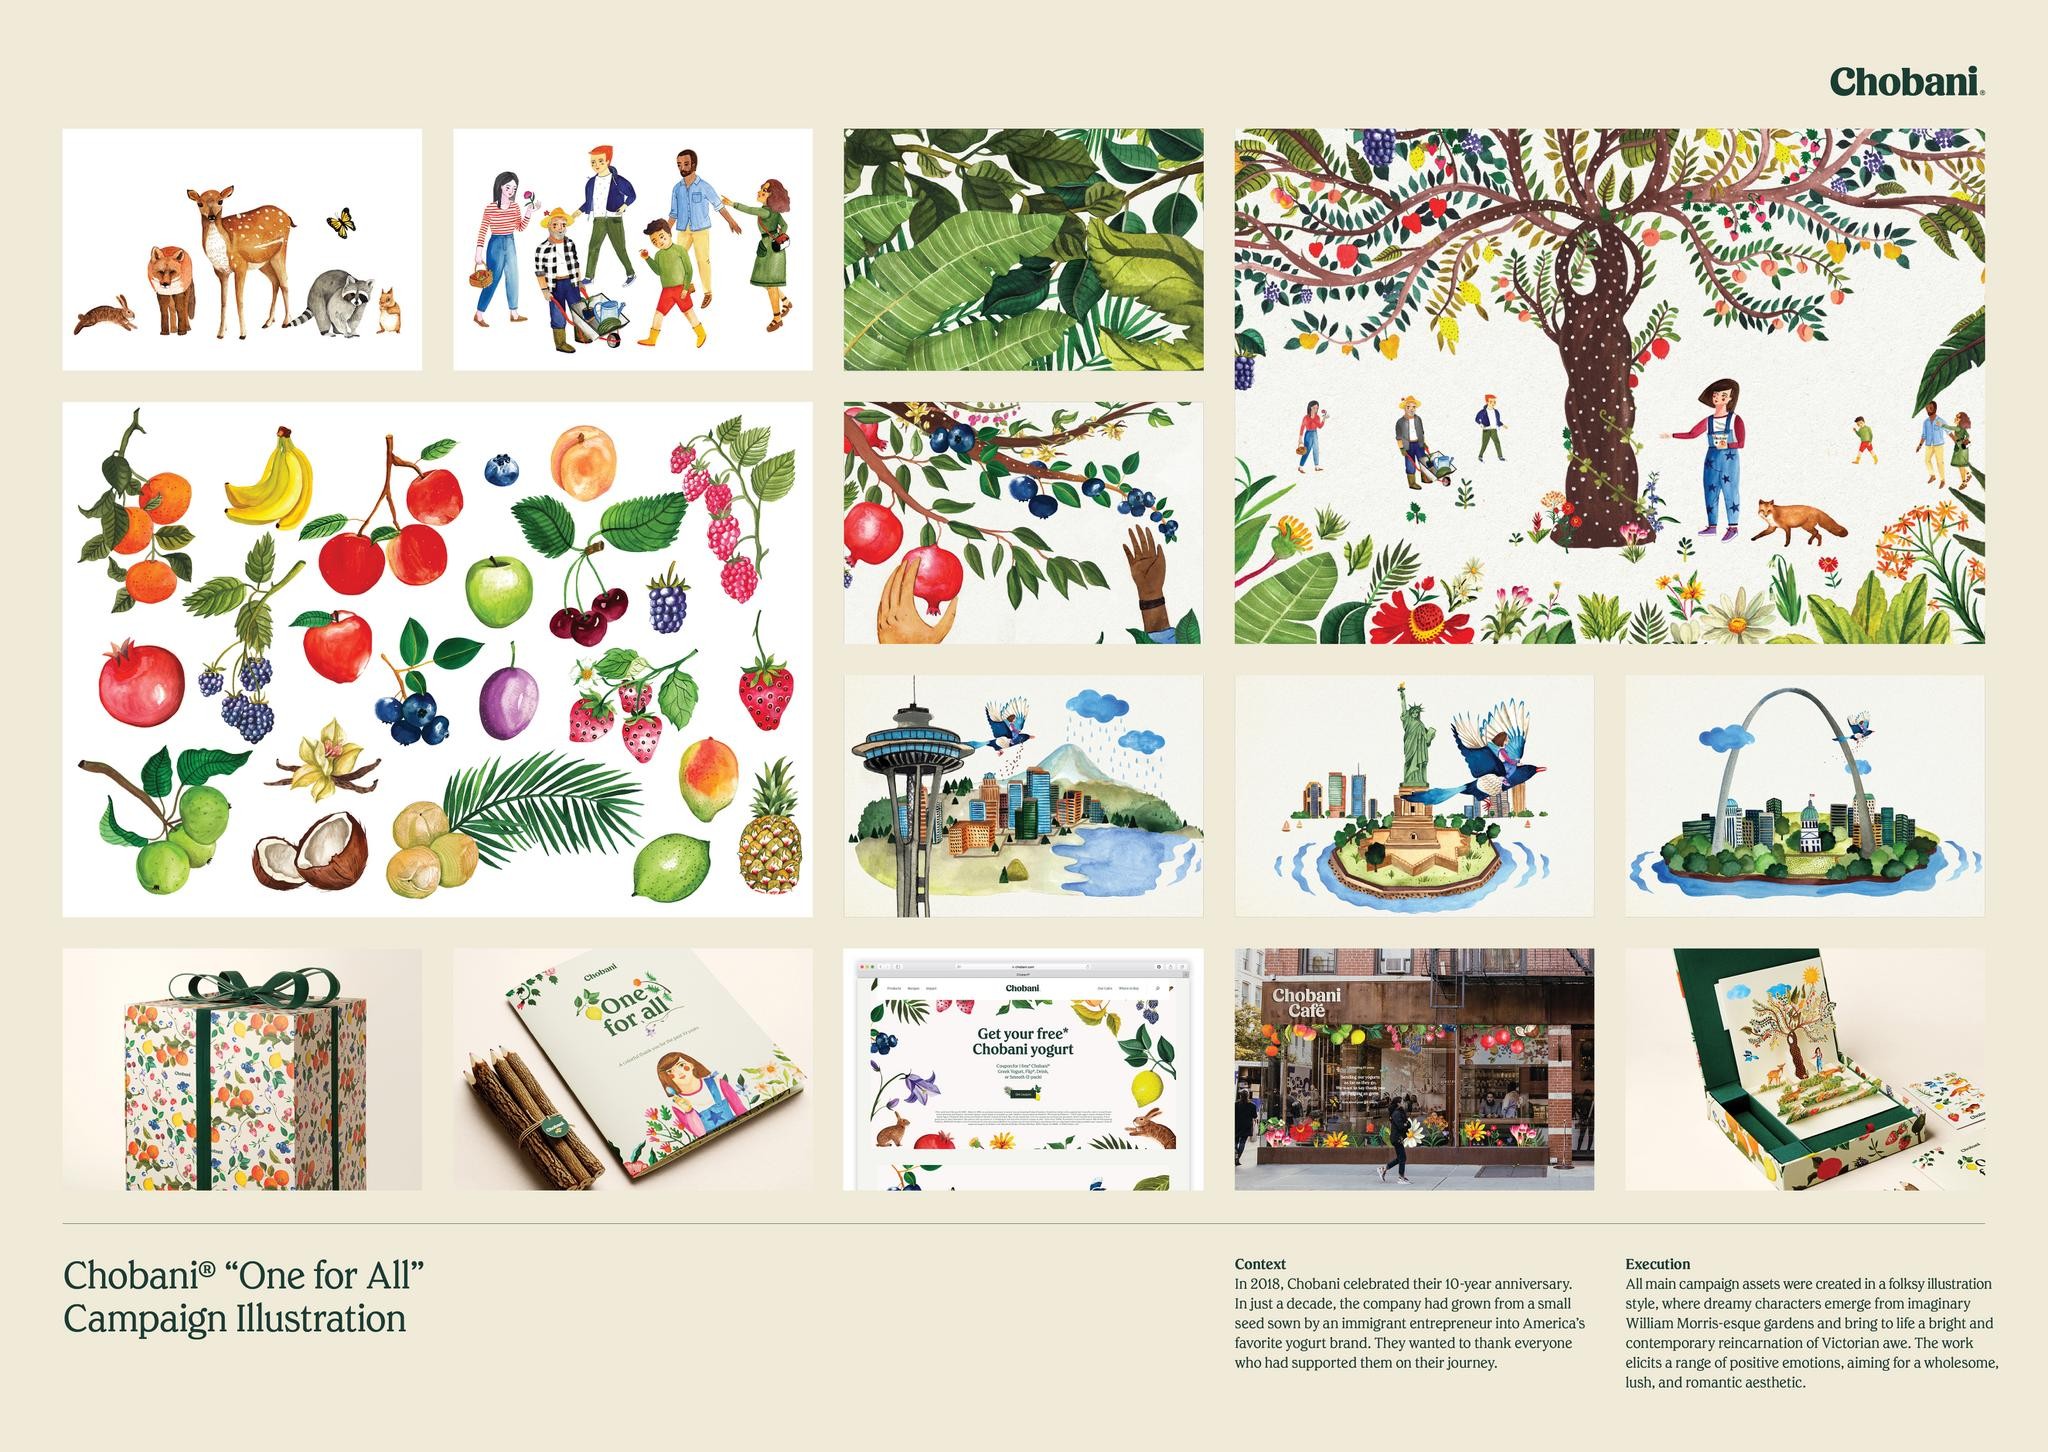 Chobani "One for All" Campaign: Illustration